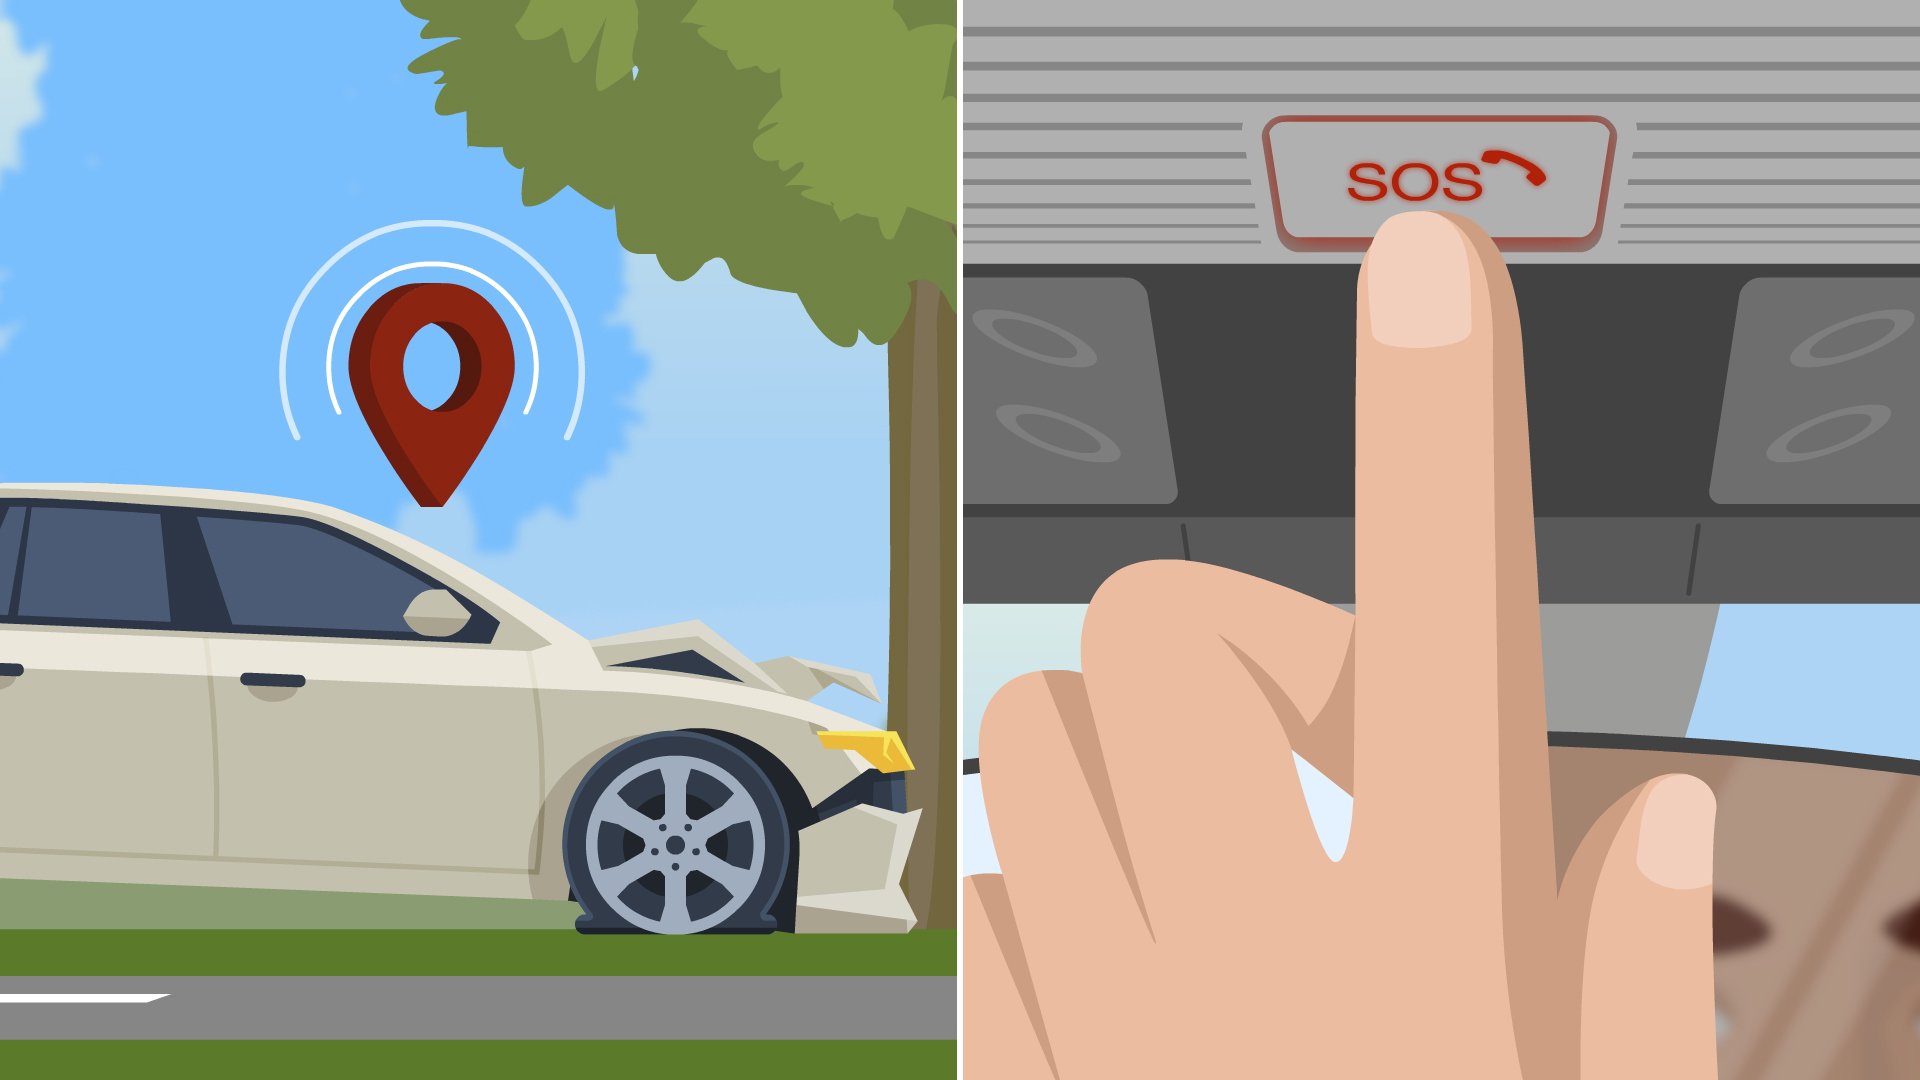 
Illustration of a car that has crashed into a tree and a finger pressing the eCall SOS button